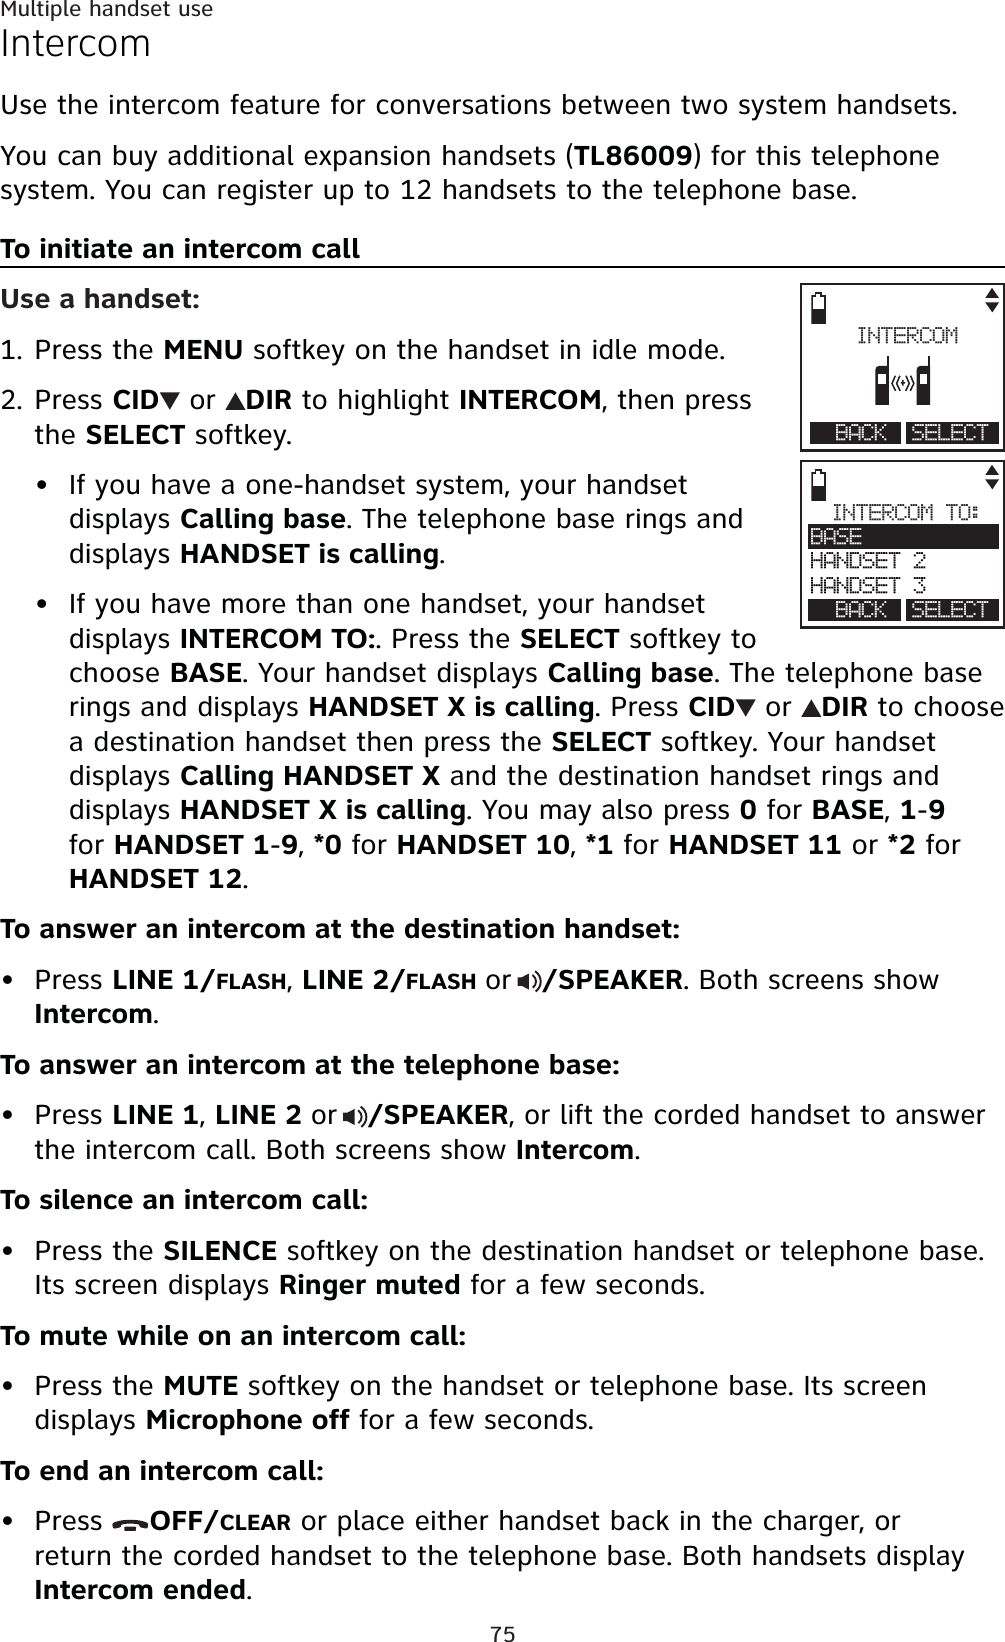 75Multiple handset useIntercomUse the intercom feature for conversations between two system handsets.You can buy additional expansion handsets (TL86009) for this telephone system. You can register up to 12 handsets to the telephone base.To initiate an intercom callUse a handset:Press the MENU softkey on the handset in idle mode.Press CID  or  DIR to highlight INTERCOM, then press the SELECT softkey.If you have a one-handset system, your handset displays Calling base. The telephone base rings and displays HANDSET is calling.If you have more than one handset, your handset displays INTERCOM TO:. Press the SELECT softkey tochoose BASE. Your handset displays Calling base. The telephone base rings and displays HANDSET X is calling. Press CID  or  DIR to choose a destination handset then press the SELECT softkey. Your handset displays Calling HANDSET X and the destination handset rings and displays HANDSET X is calling. You may also press 0 for BASE,1-9for HANDSET 1-9,*0 for HANDSET 10,*1 for HANDSET 11 or *2 for HANDSET 12.To answer an intercom at the destination handset:Press LINE 1/FLASH,LINE 2/FLASHor/SPEAKER. Both screens show Intercom.To answer an intercom at the telephone base:Press LINE 1,LINE 2or/SPEAKER, or lift the corded handset to answer the intercom call. Both screens show Intercom.To silence an intercom call:Press the SILENCE softkey on the destination handset or telephone base. Its screen displays Ringer muted for a few seconds.To mute while on an intercom call:Press the MUTE softkey on the handset or telephone base. Its screen displays Microphone off for a few seconds.To end an intercom call:Press  OFF/CLEAR or place either handset back in the charger, or return the corded handset to the telephone base. Both handsets display Intercom ended.1.2.•••••••INTERCOM TO:BASEHANDSET 2HANDSET 3BACK SELECTINTERCOMHomeBACK SELECT